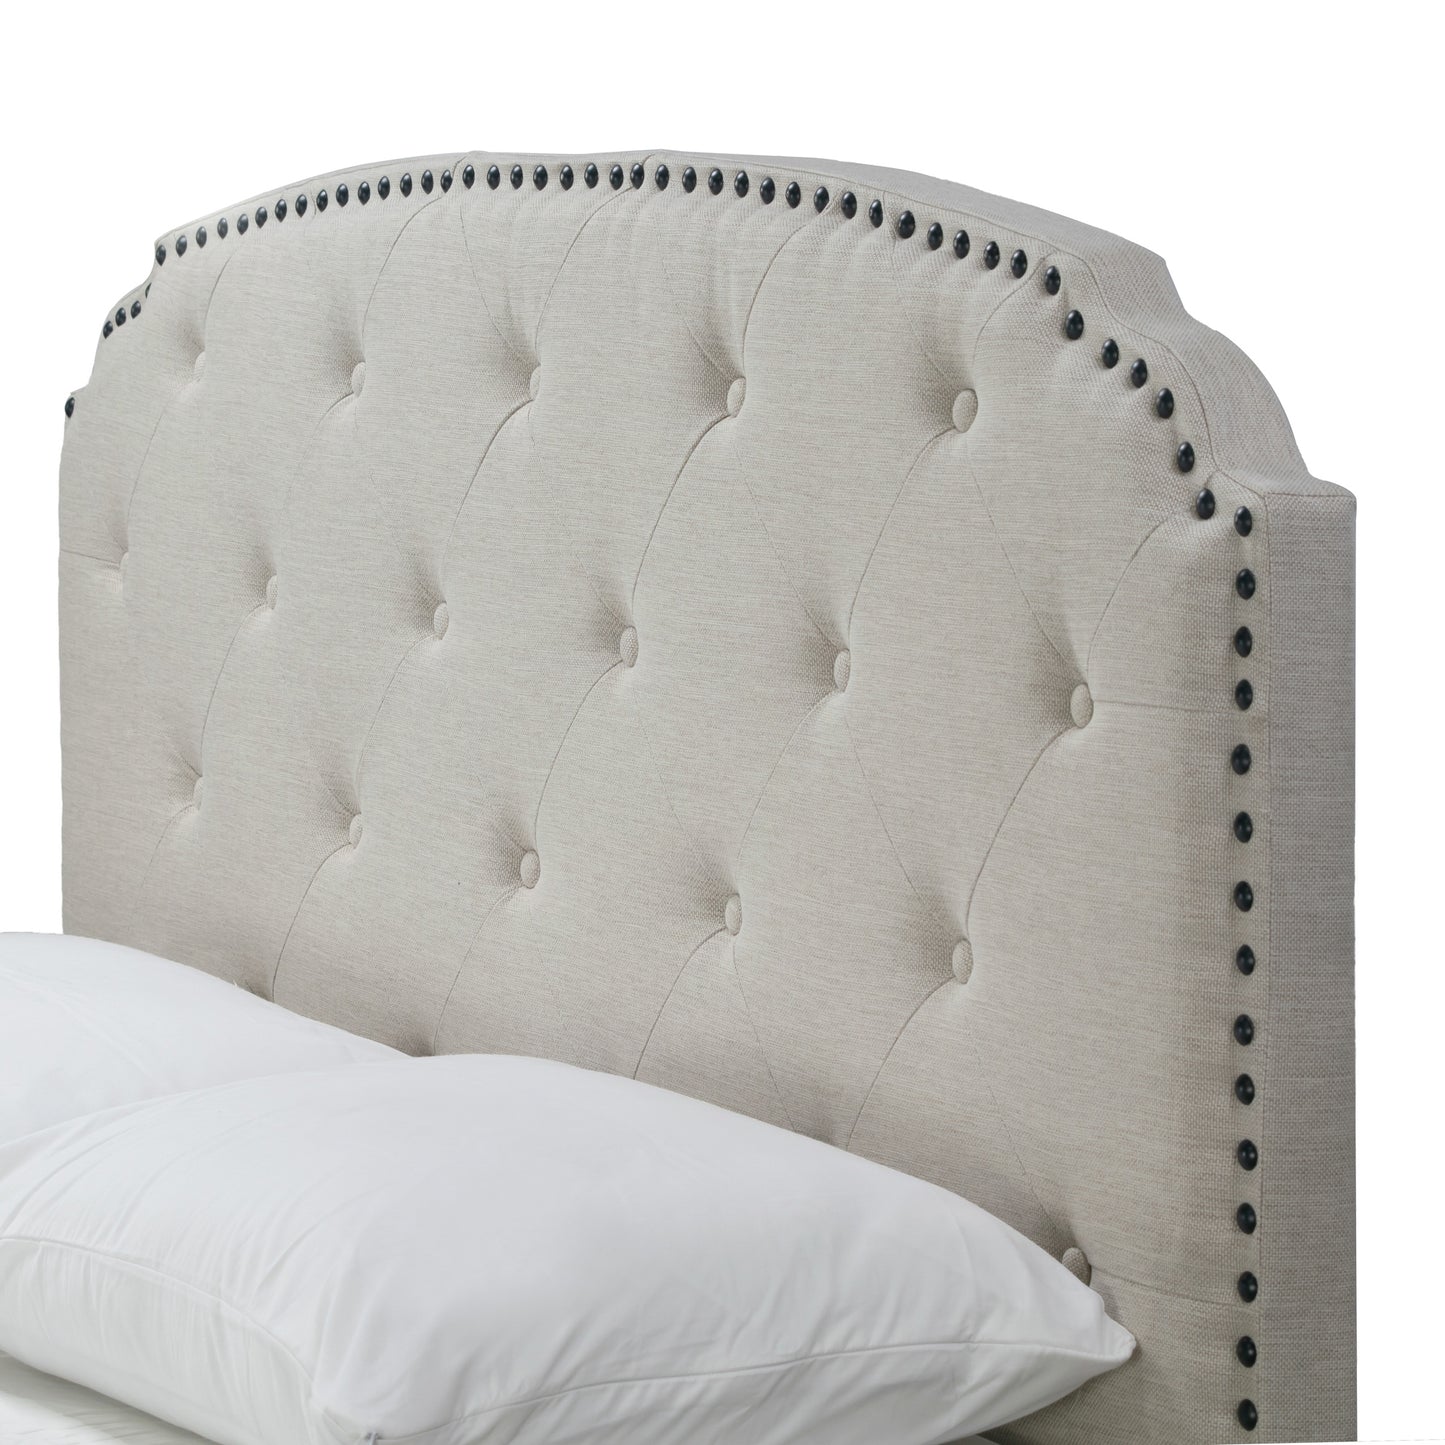 Arin Beige Fabric Queen Bed with Button Tufting and Black Nail Head Trim